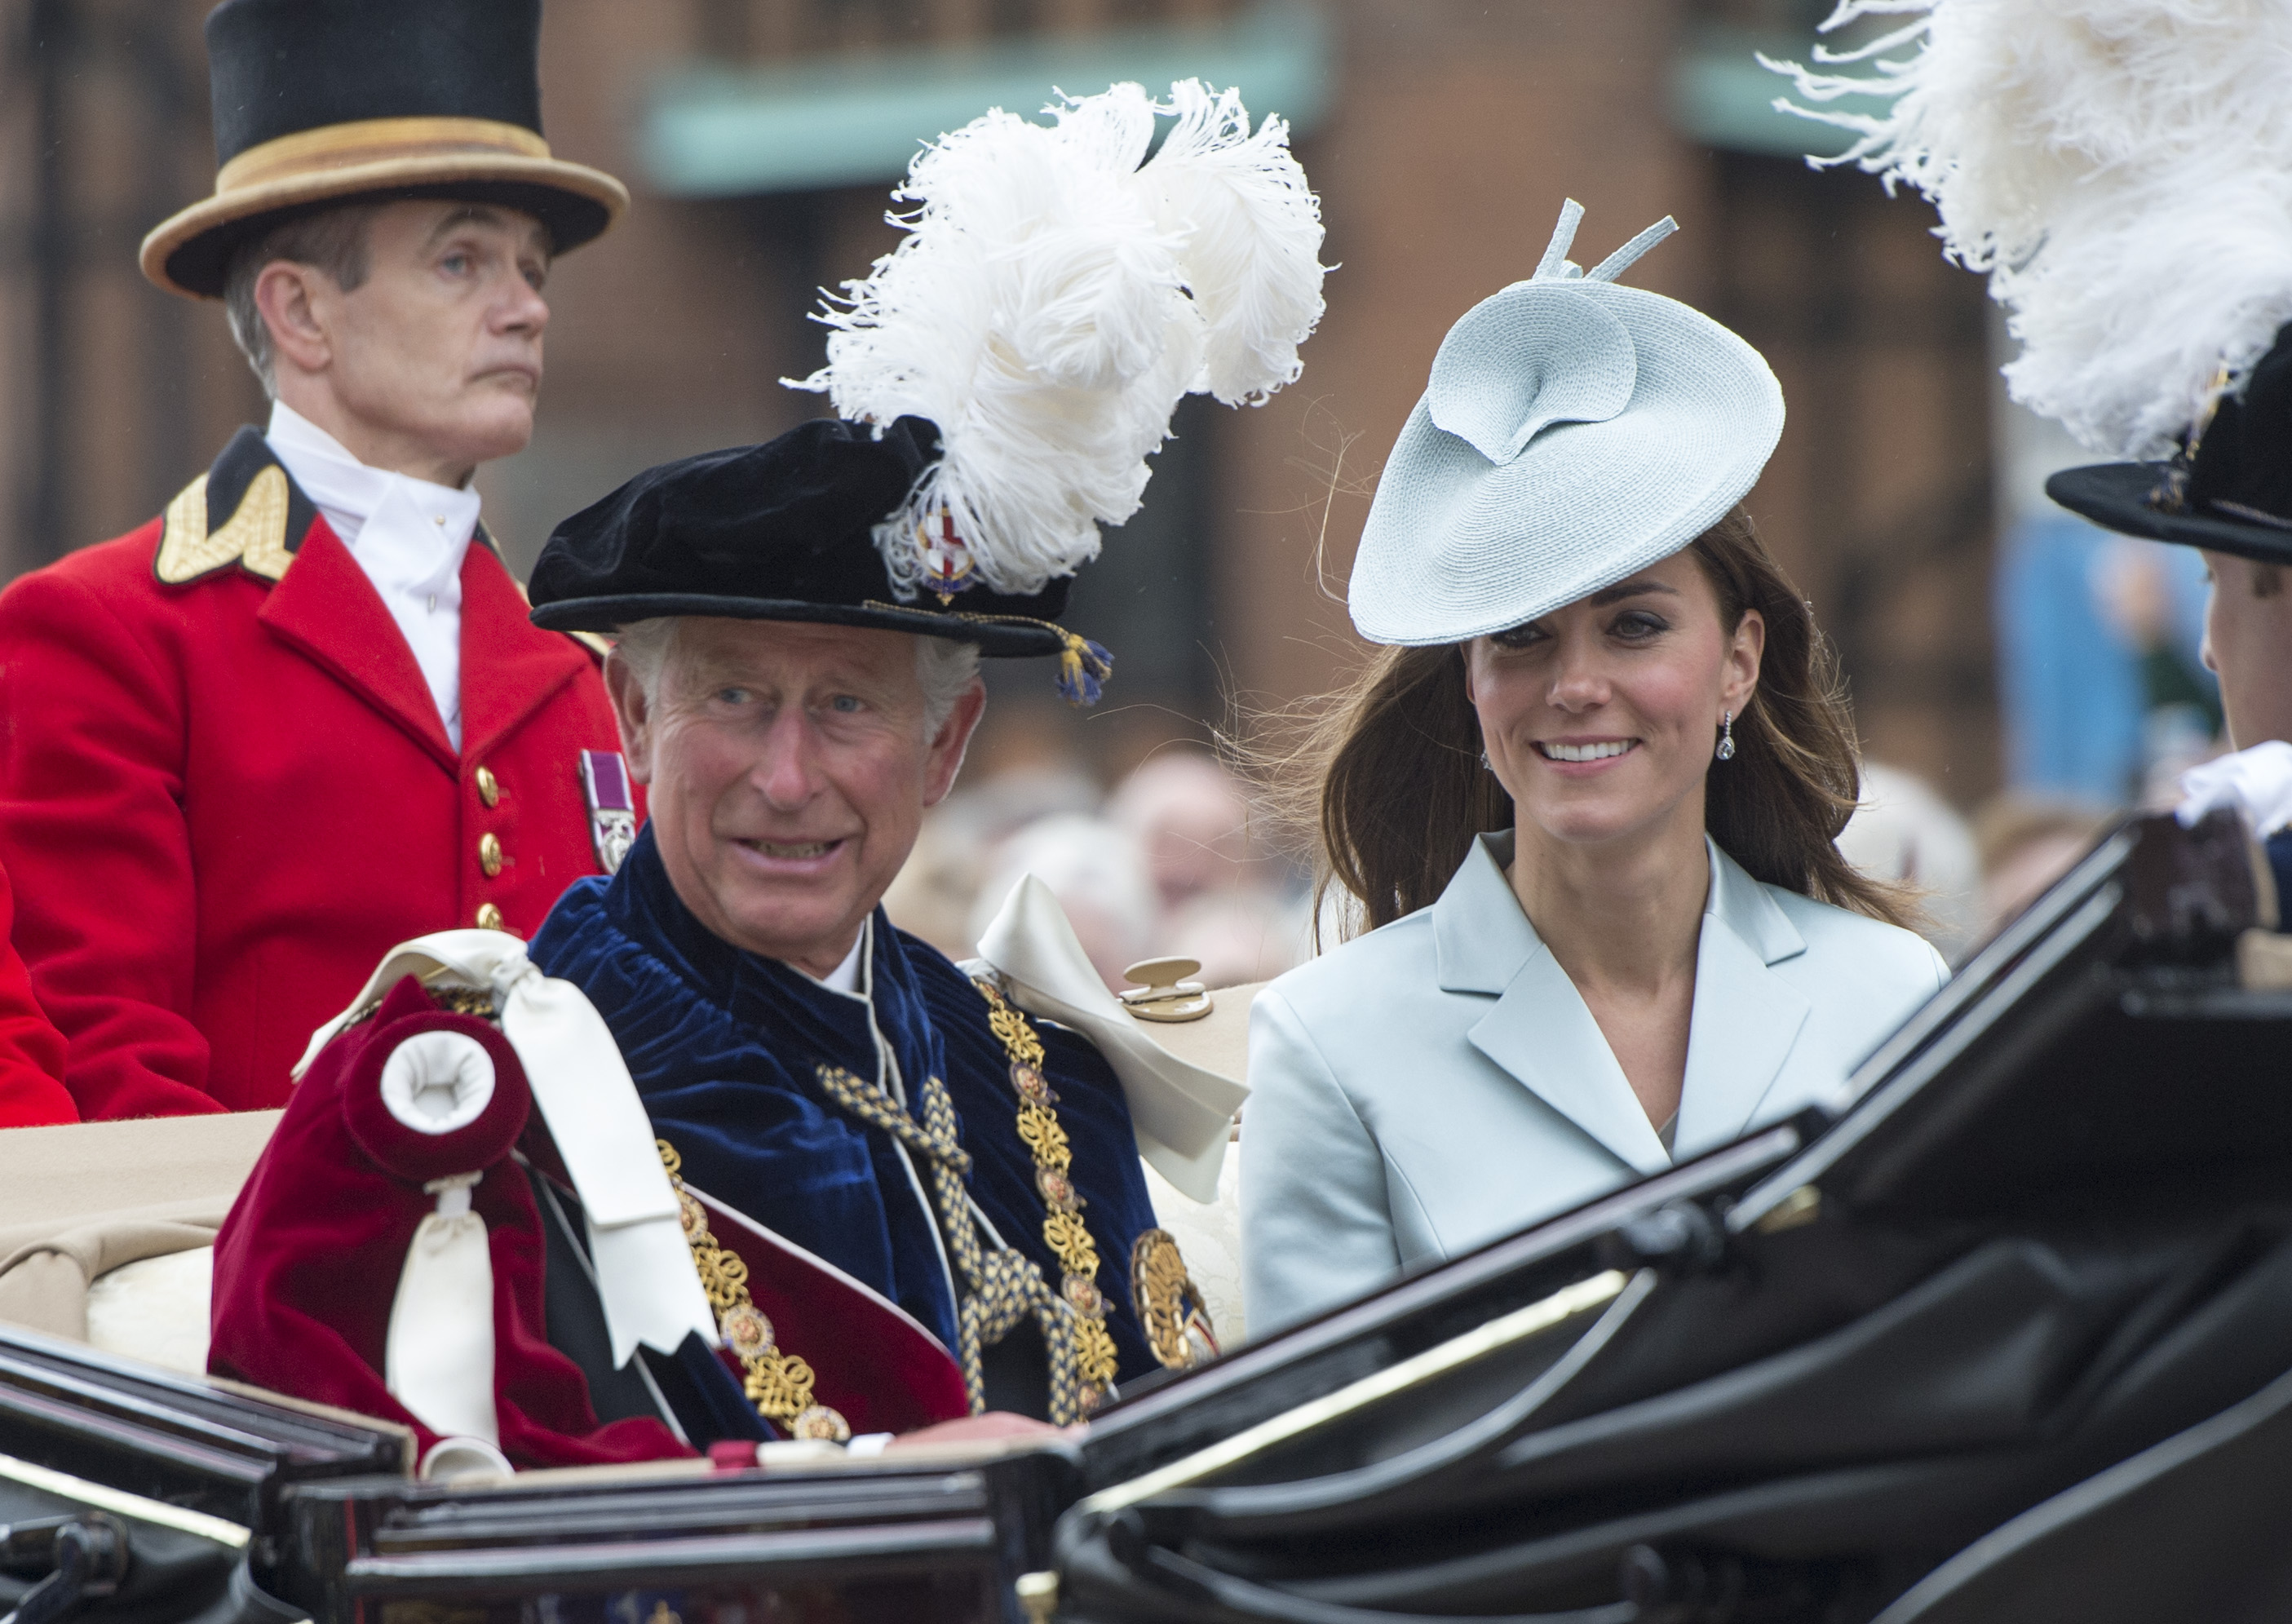 Prince Charles and Kate Middleton sit in a carriage together.